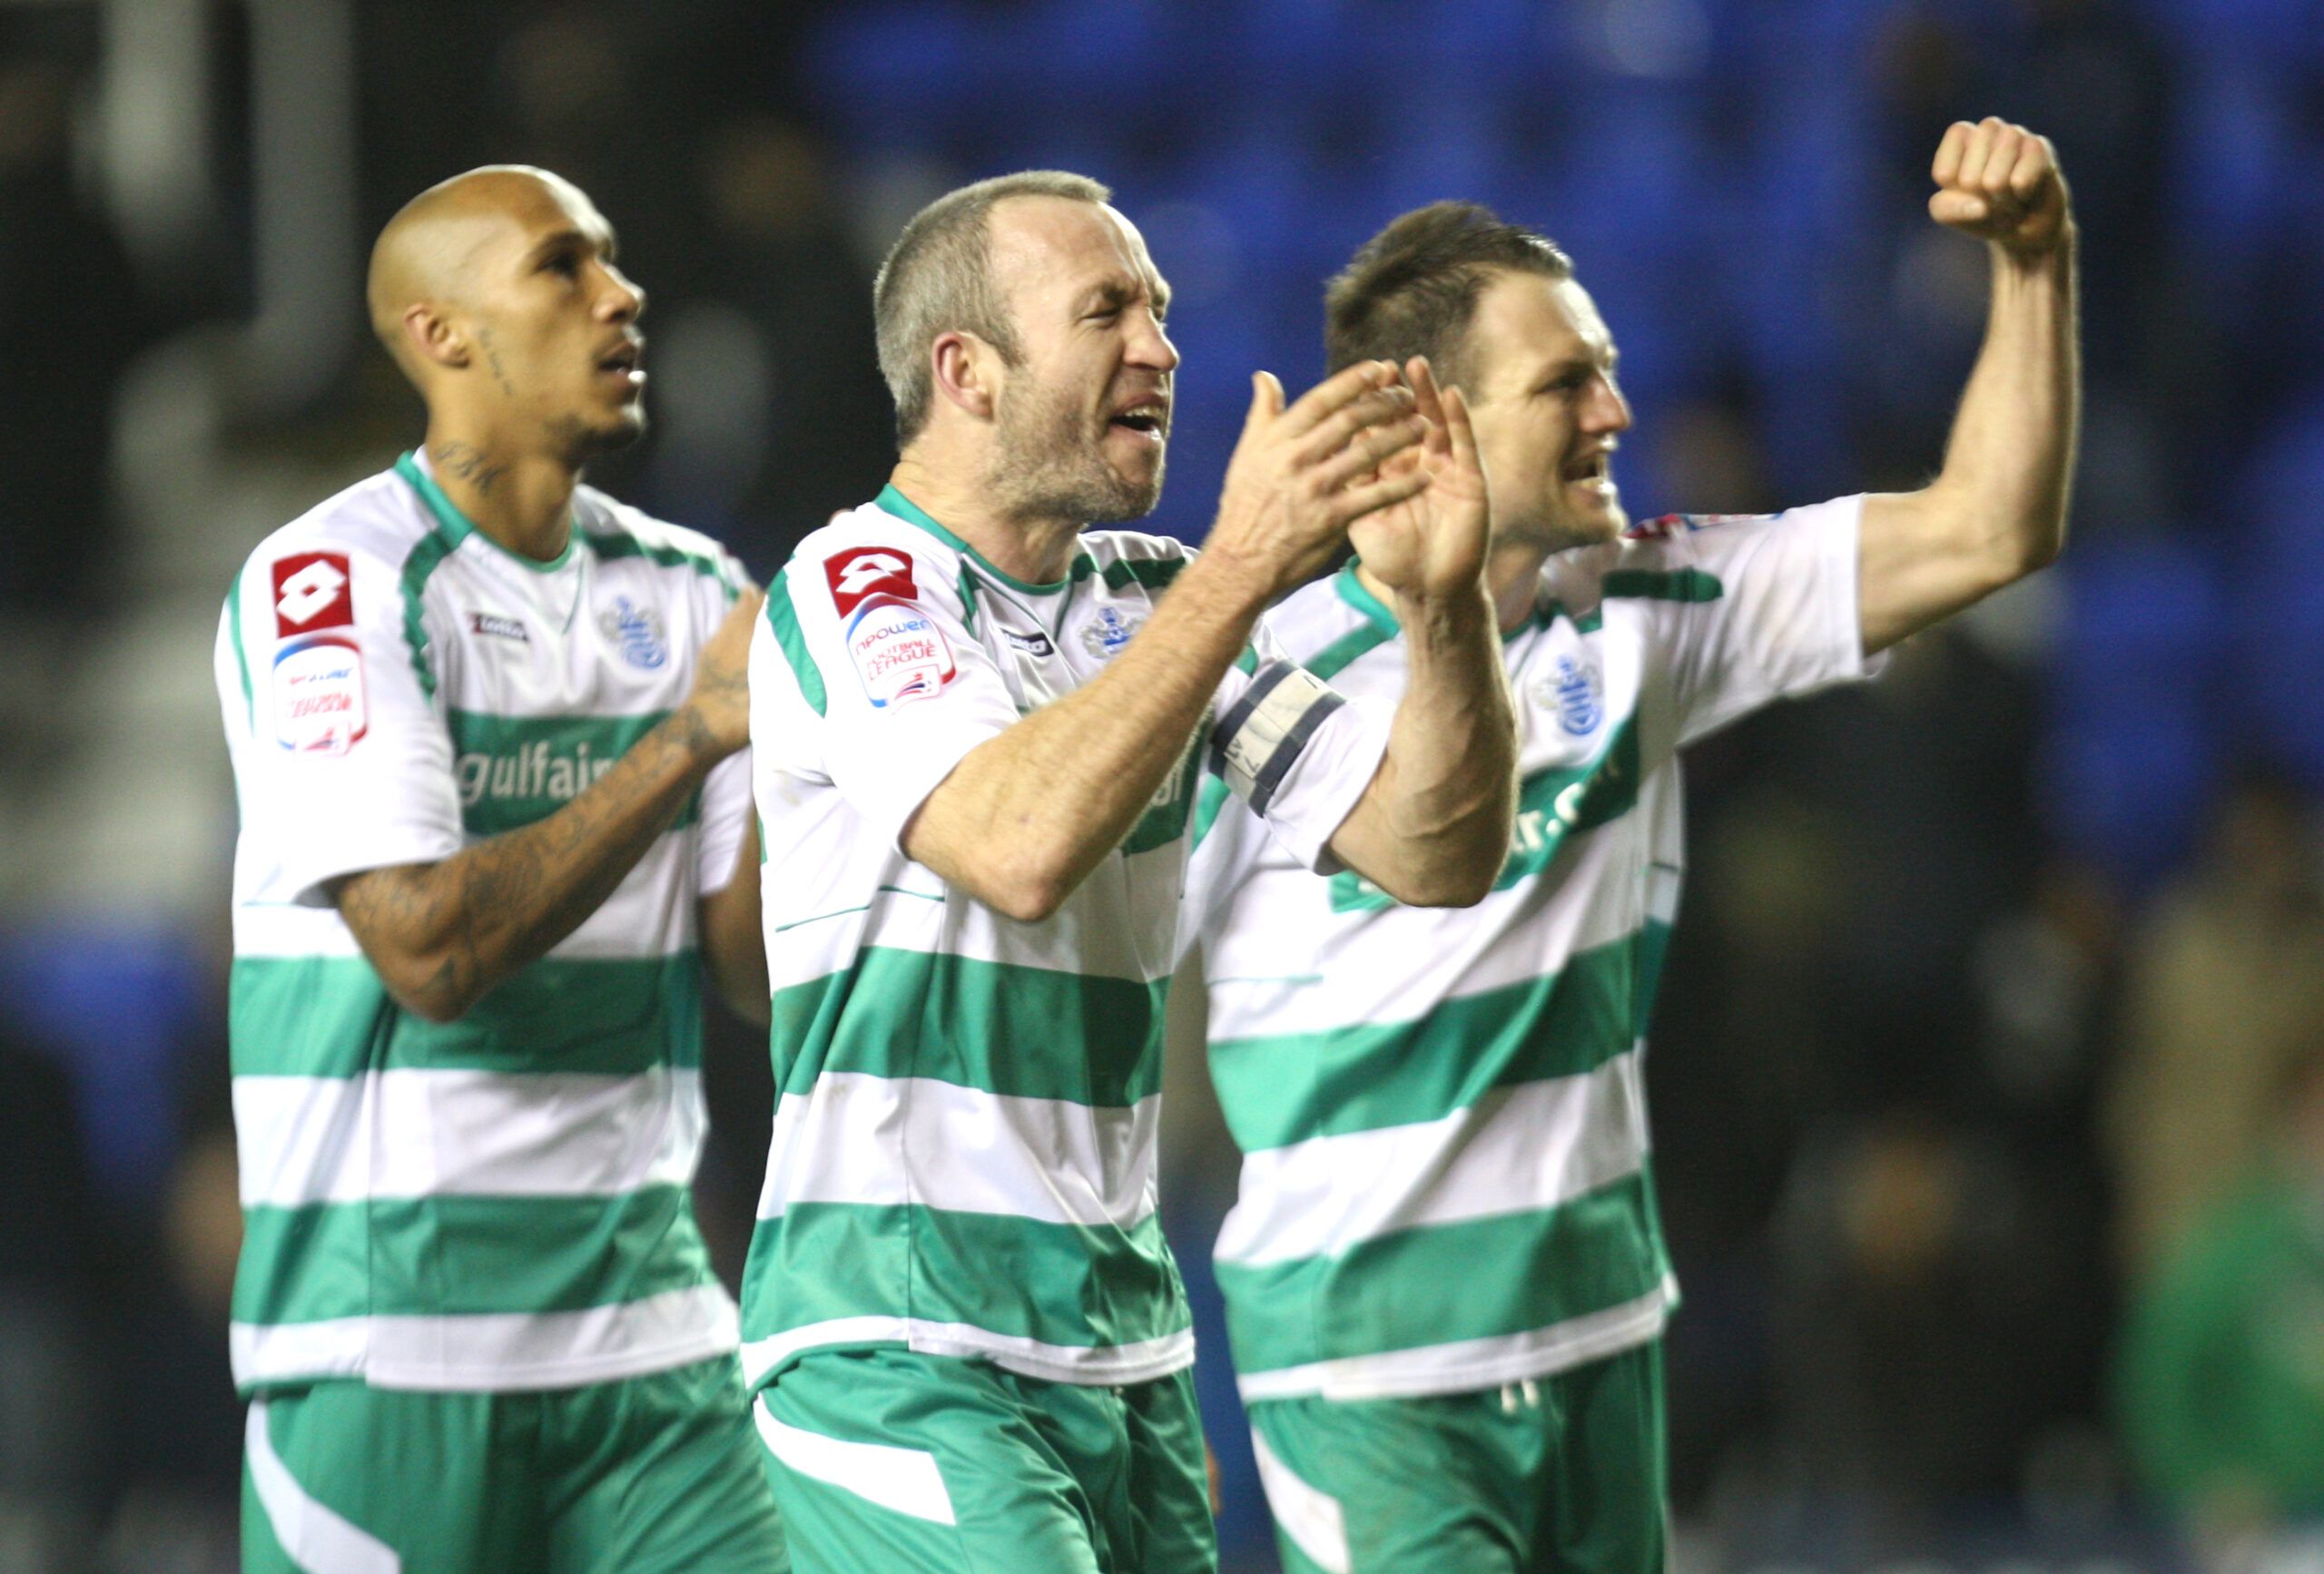 Football - Reading v Queens Park Rangers - npower Football League Championship - The Madejski Stadium - 10/11 - 4/2/11 
(L-R) - Fitz Hall, Shaun Derry and Clint Hill - Queens Park Rangers celebrate victory at full time 
Mandatory Credit: Action Images / Steven Paston